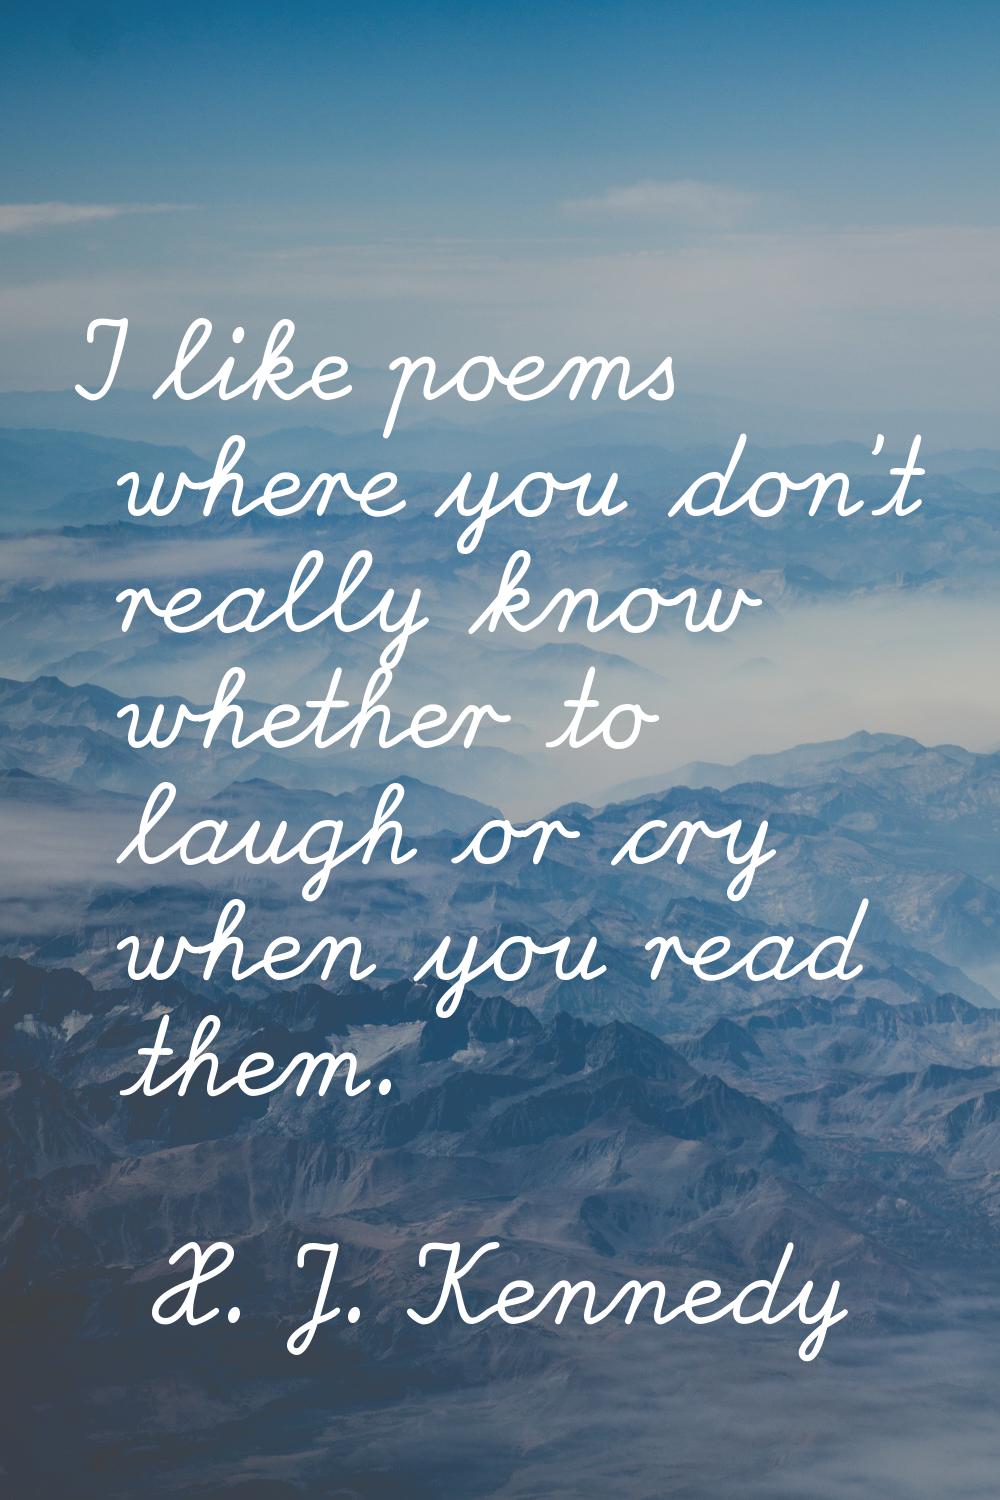 I like poems where you don't really know whether to laugh or cry when you read them.